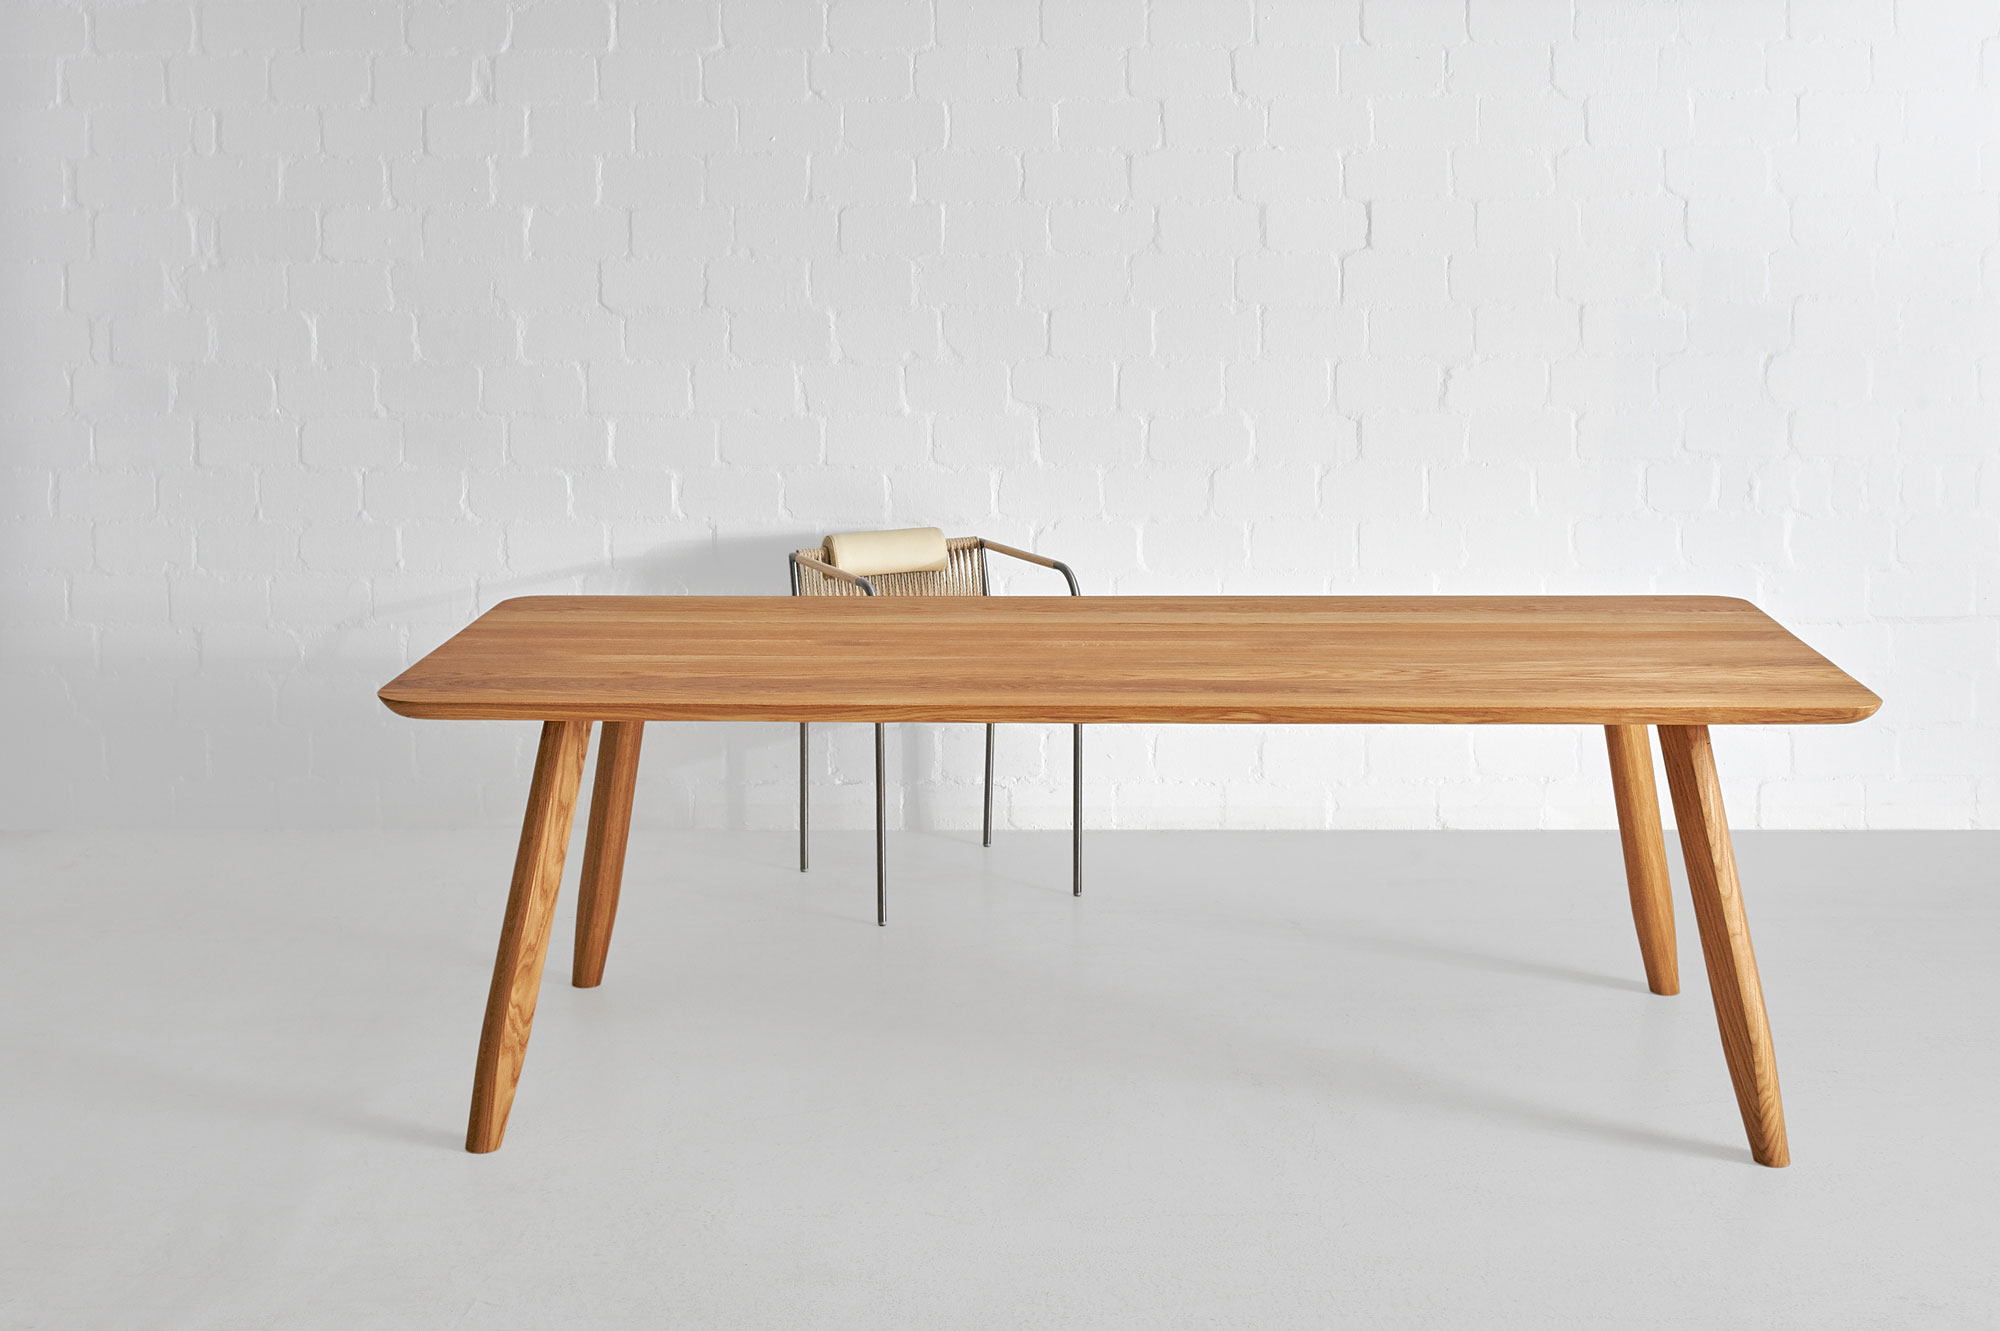 Stylish Dining Table AETAS BASIC 4 0207 custom made in solid wood by vitamin design